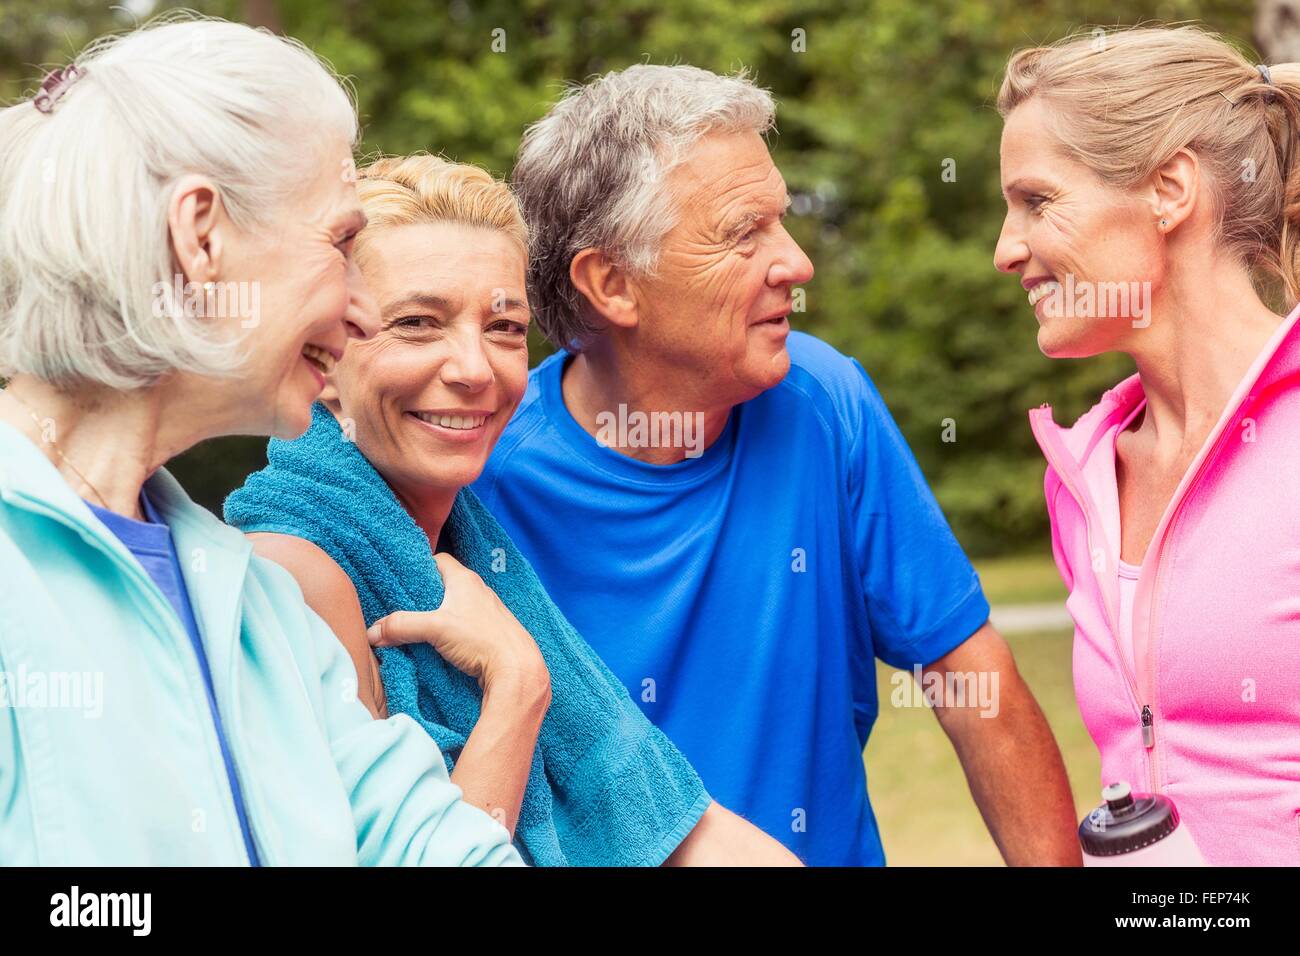 Group of adults taking a break from exercise, outdoors, smiling Stock Photo